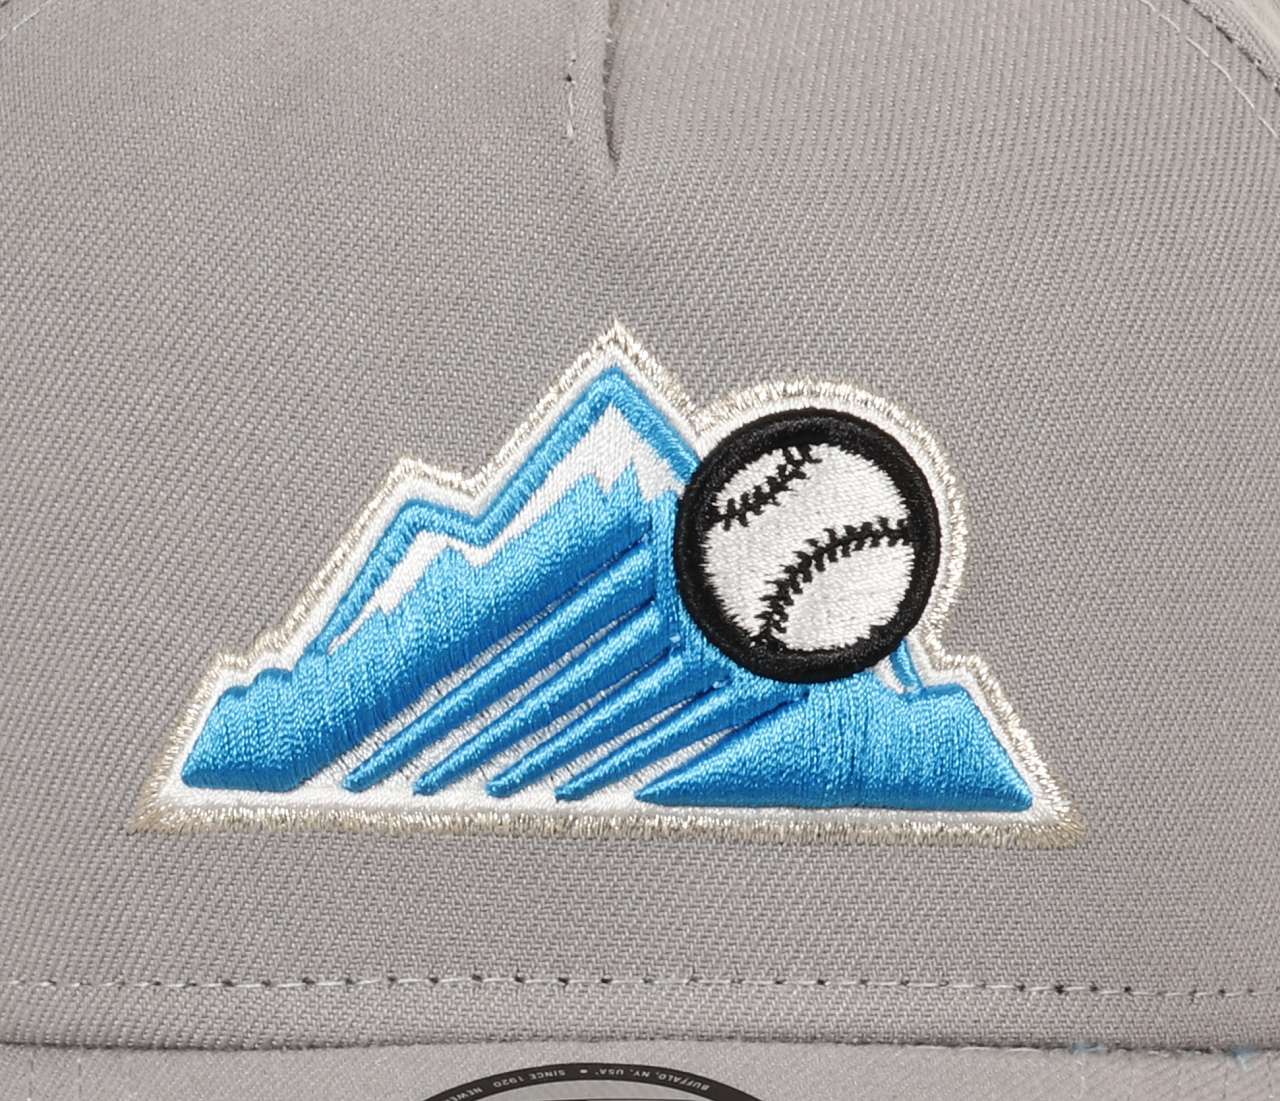 Colorado Rockies MLB 20th anniversary Sidepatch Cooperstown Gray Sky 9Forty A-Frame Snapback Cap New Era